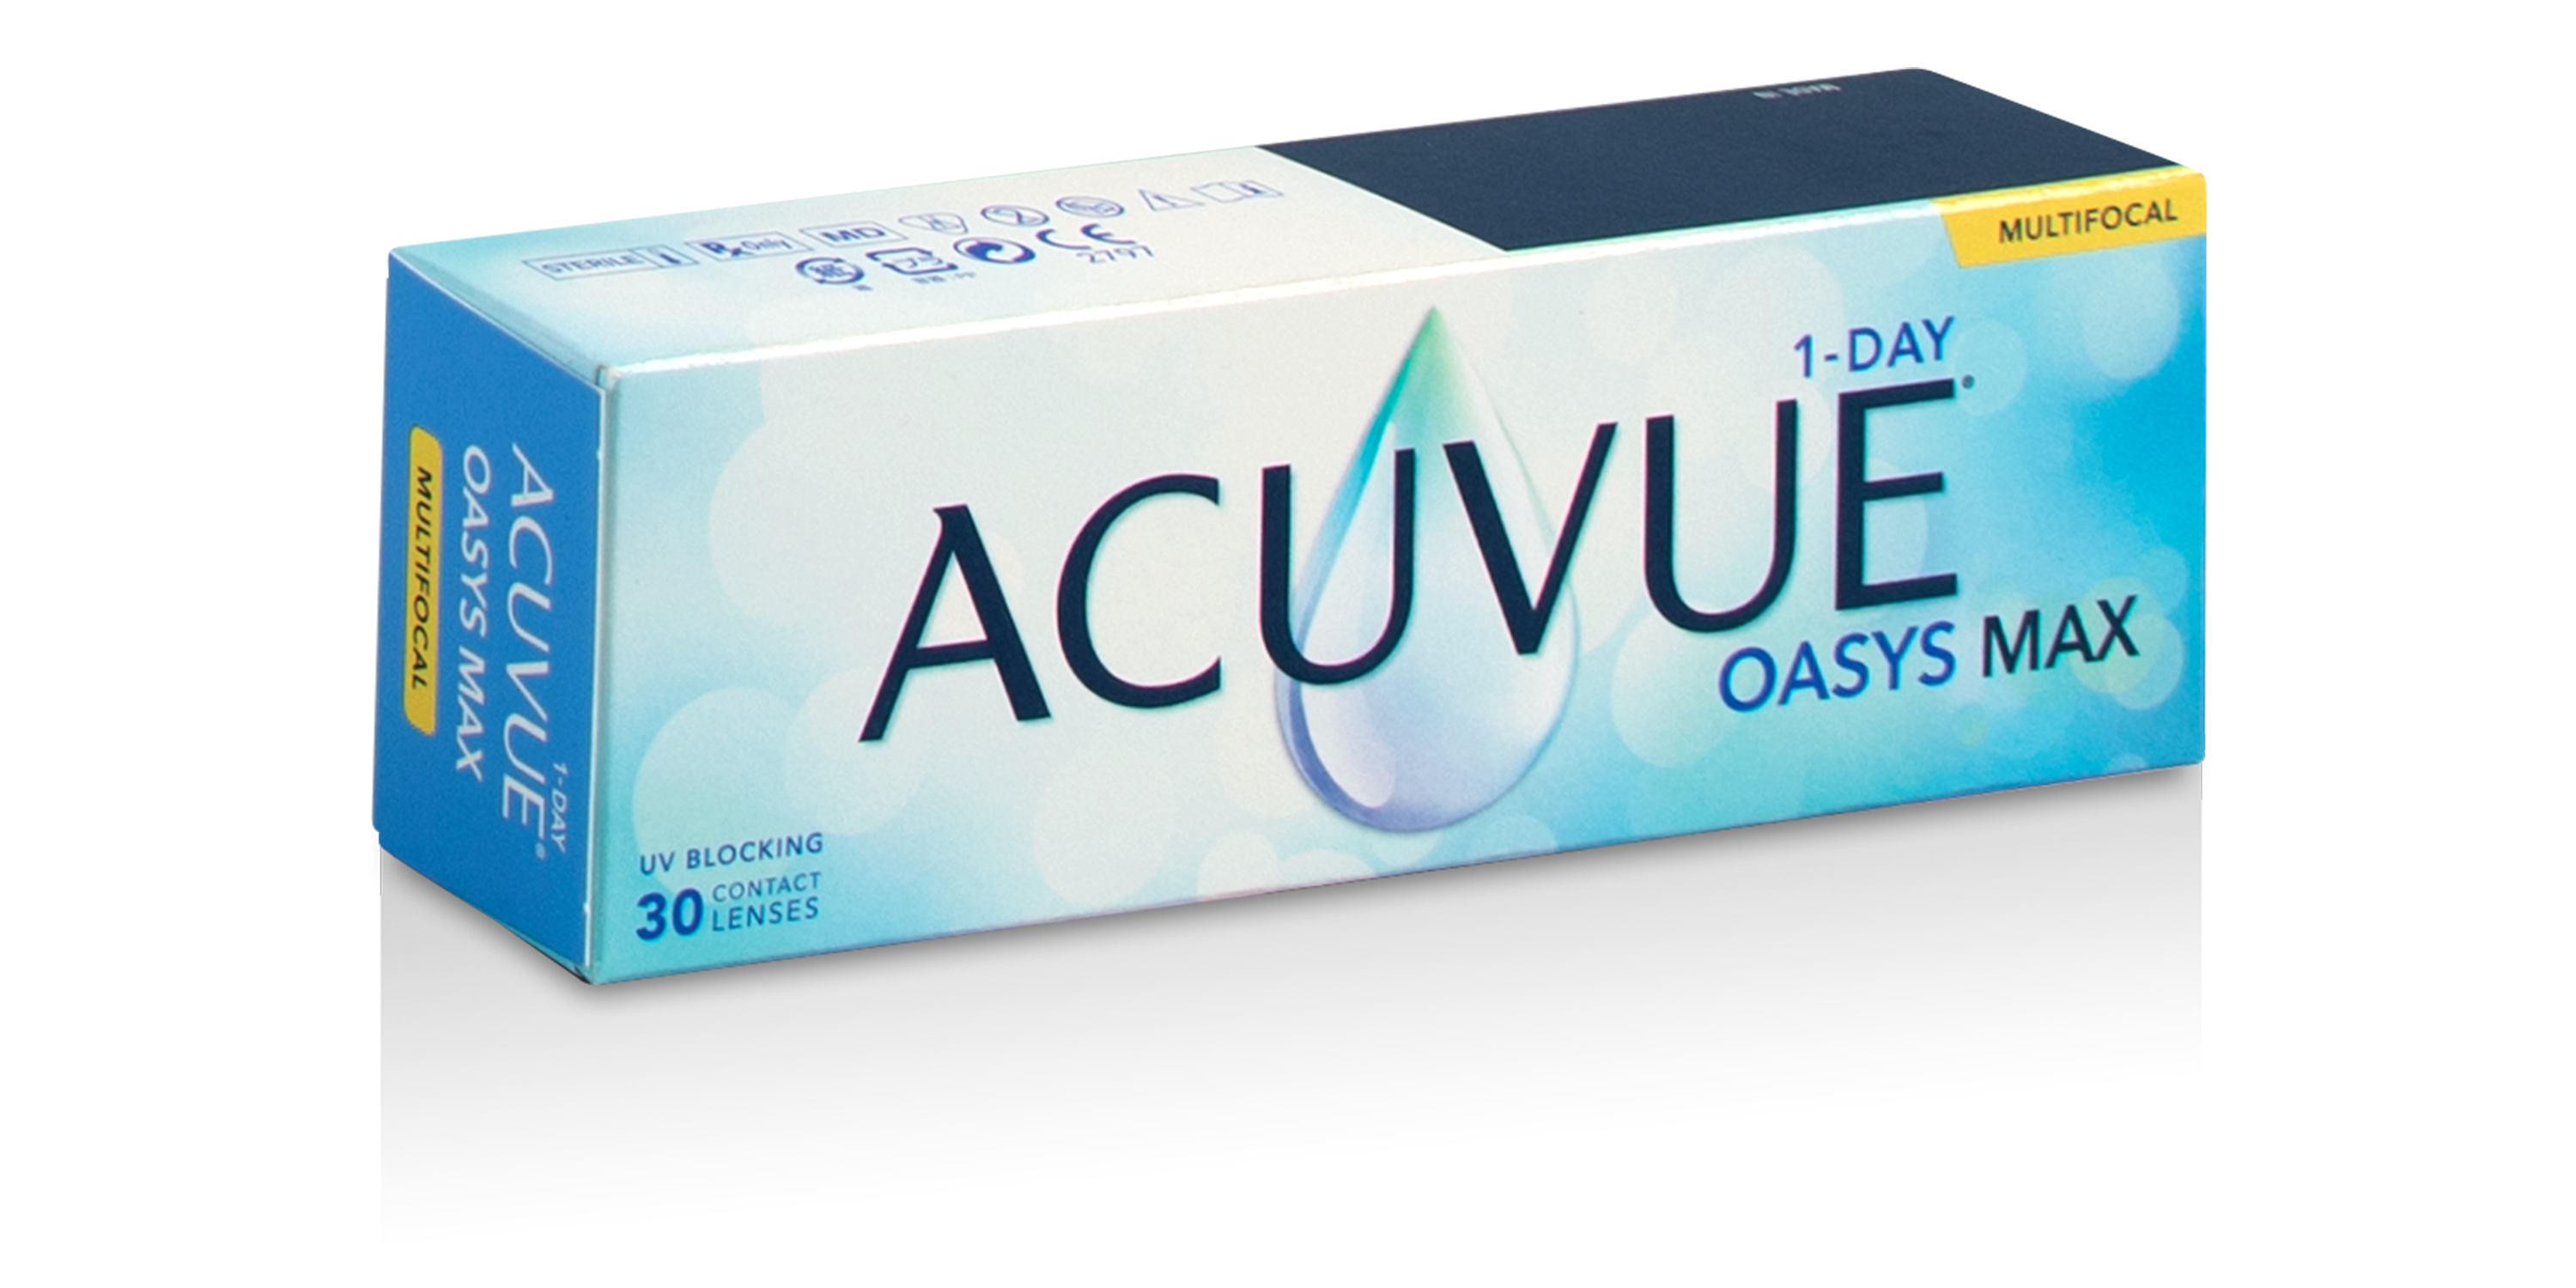 ACUVUE® OASYS MAX 1-Day Multifocal, 30 pack